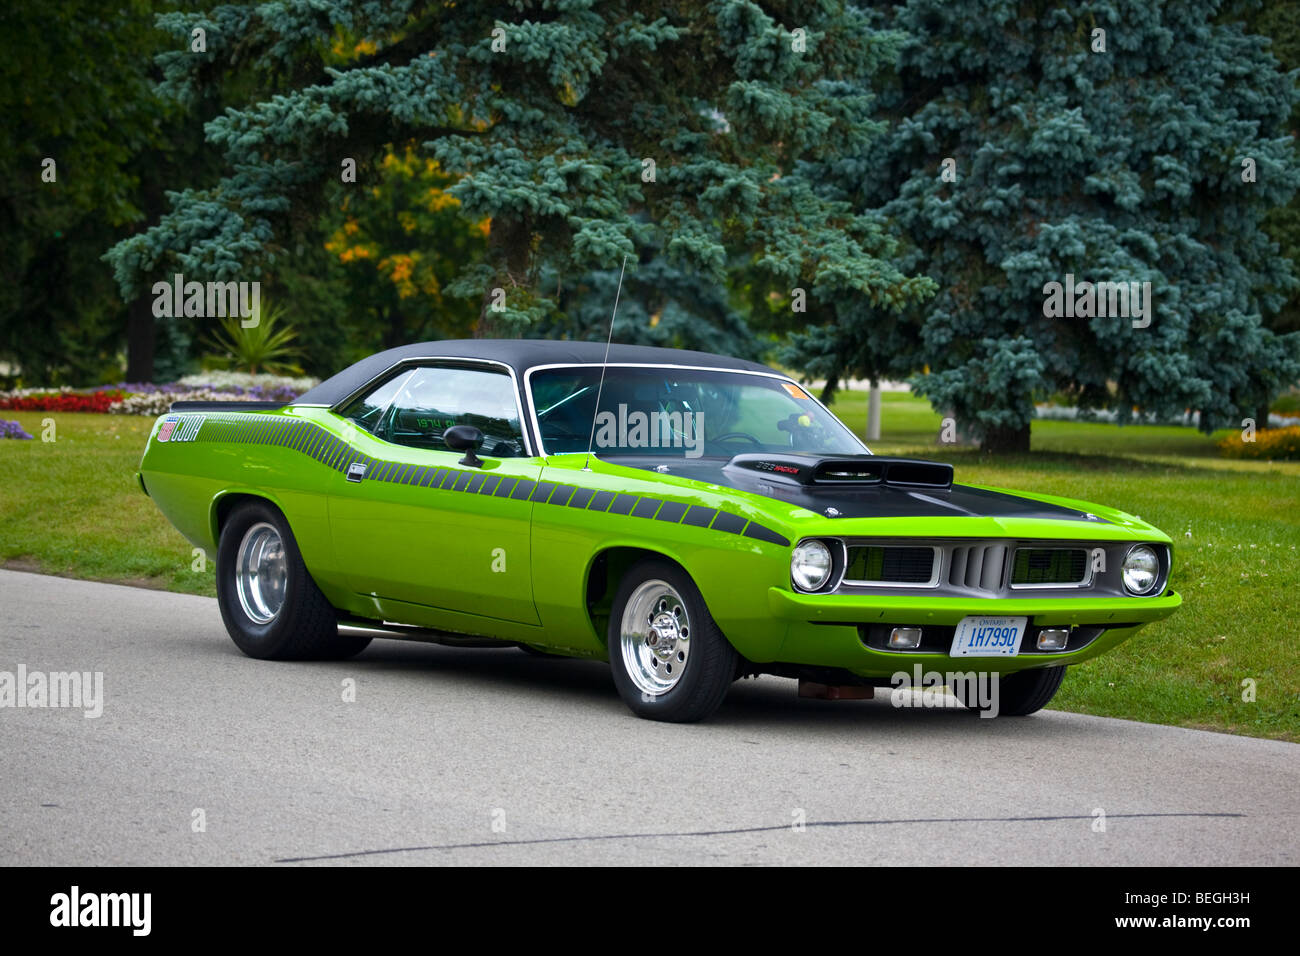 1974 Plymouth Barracuda Muscle Car Stock Photo